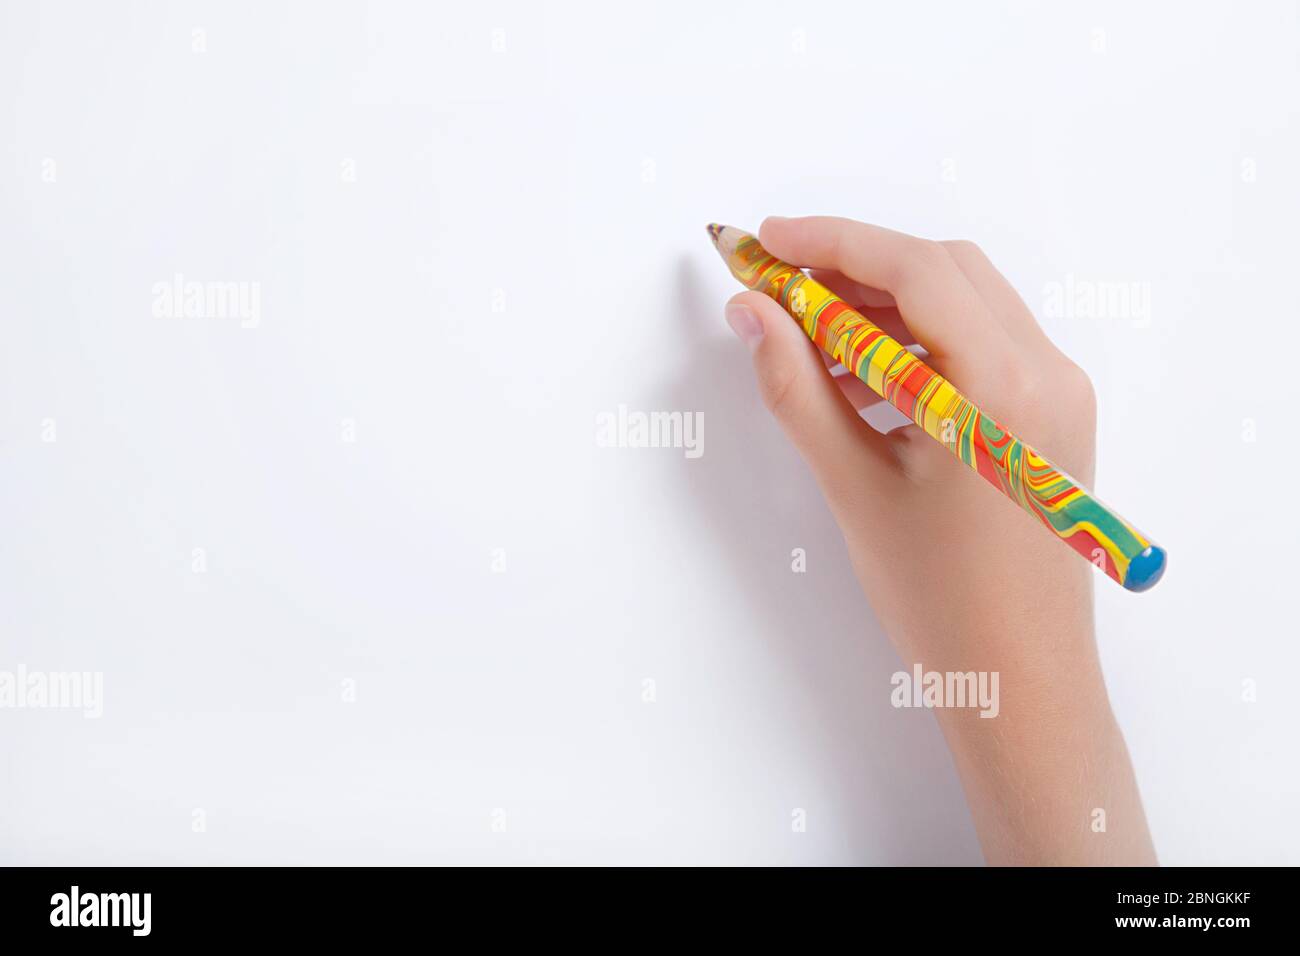 The child's hand holding a multicolored pencil against a white sheet of paper Stock Photo